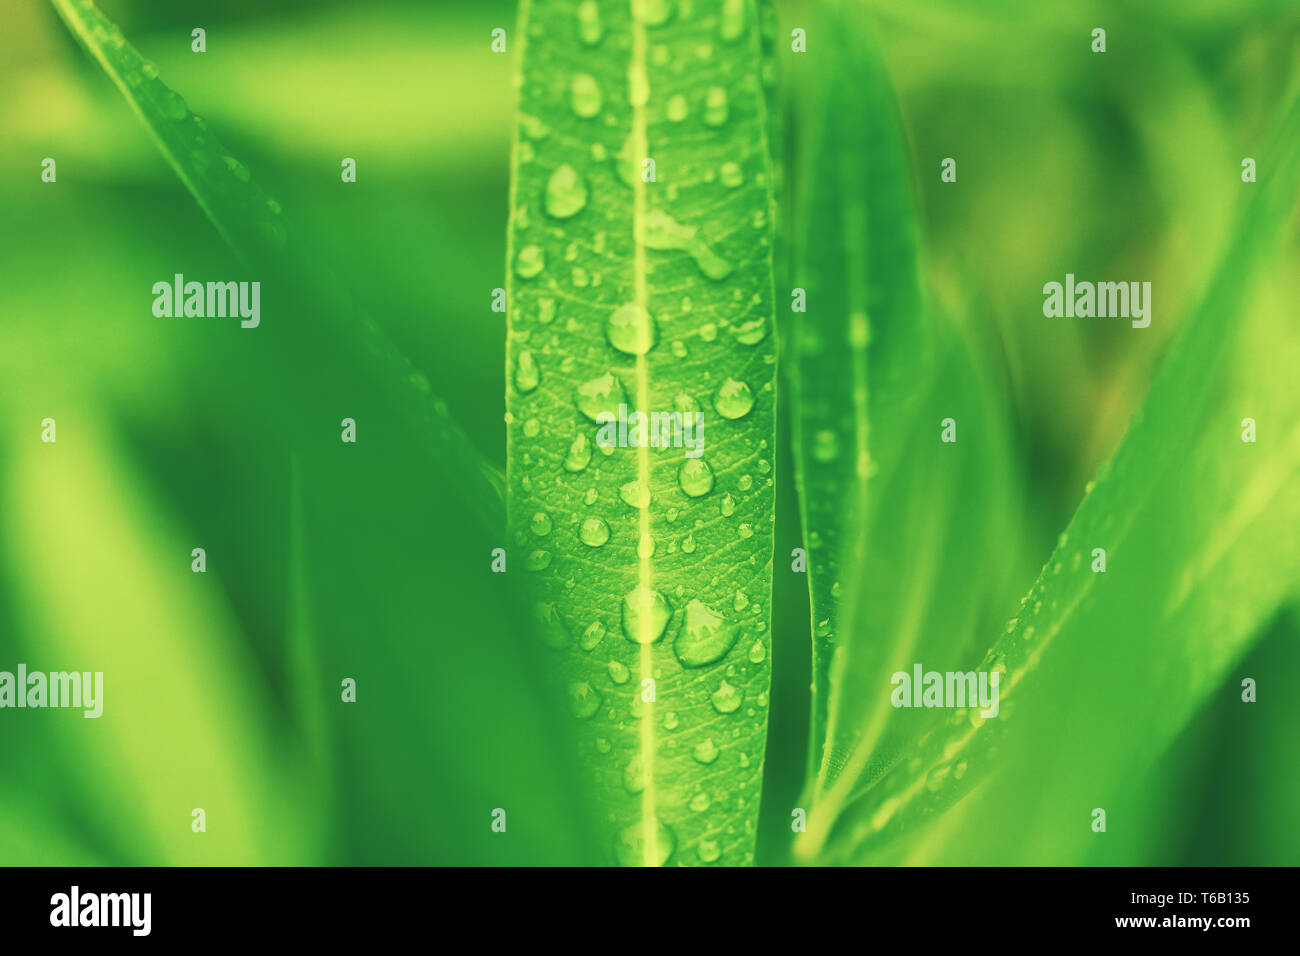 water drops on green plant leaf Stock Photo